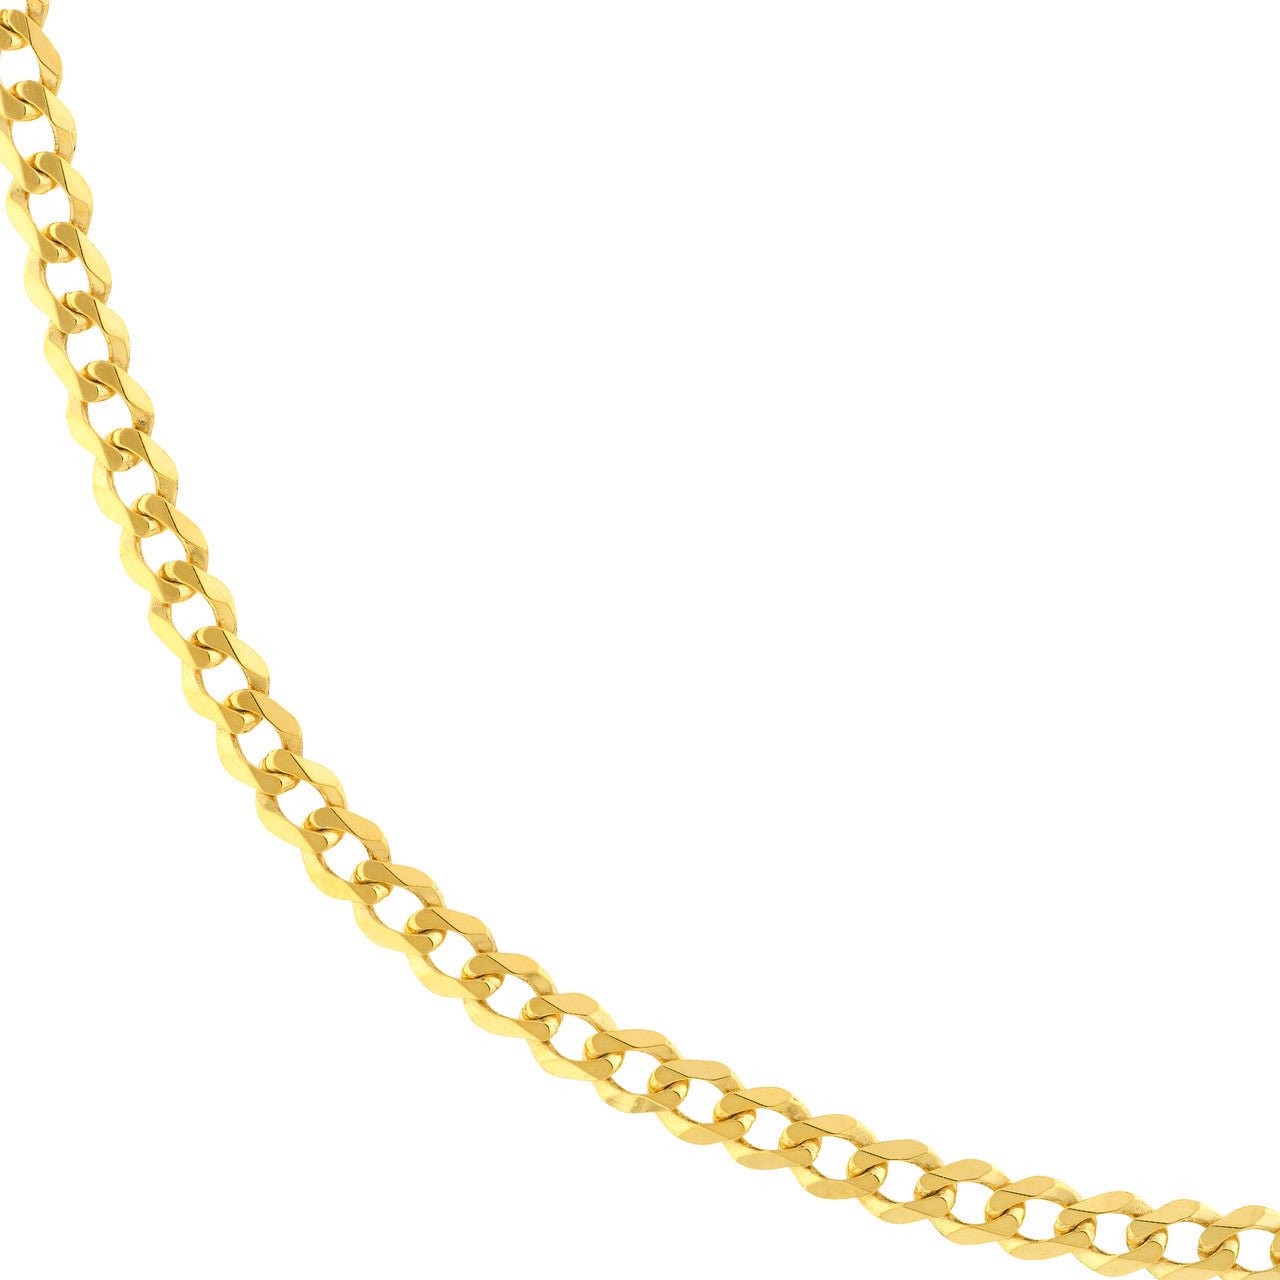 Chain Strap Extender in Light Gold Rolo Chain Style for Designer Bags